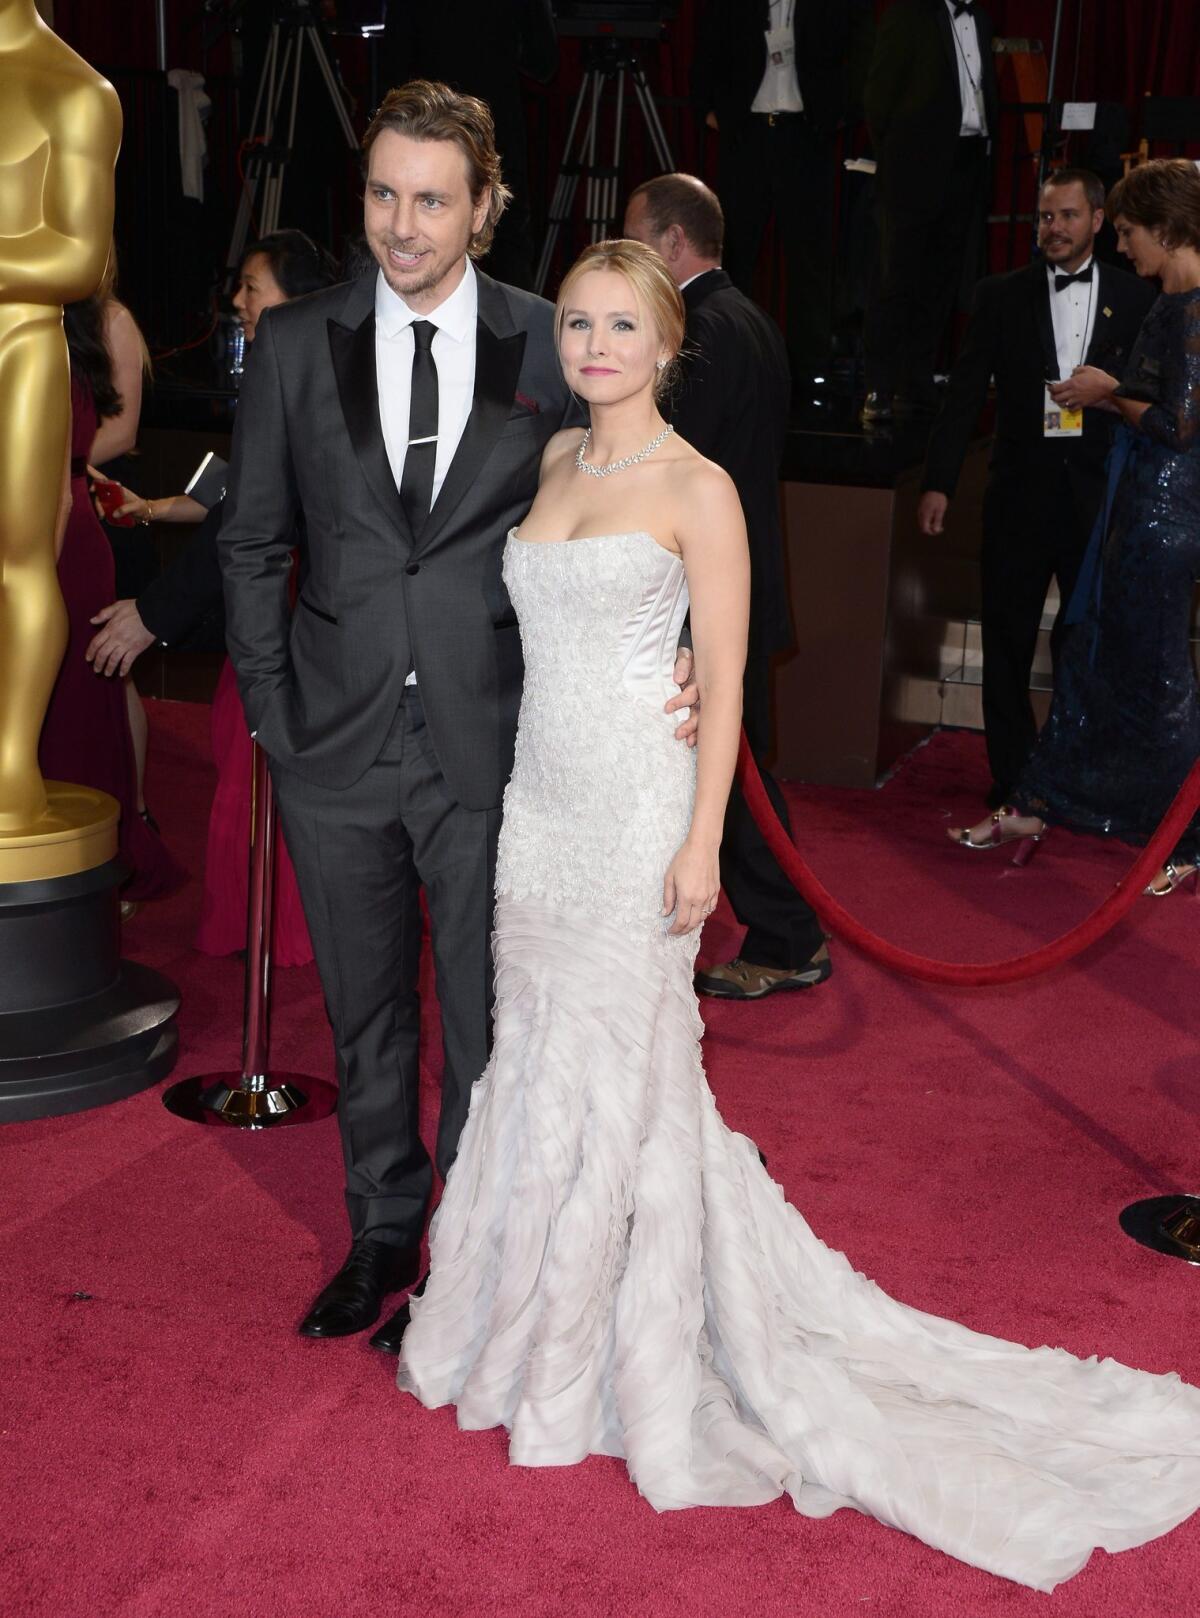 Dax Shepard and Kristen Bell arrive for the 86th annual Academy Awards at the Dolby Theatre in Hollywood.